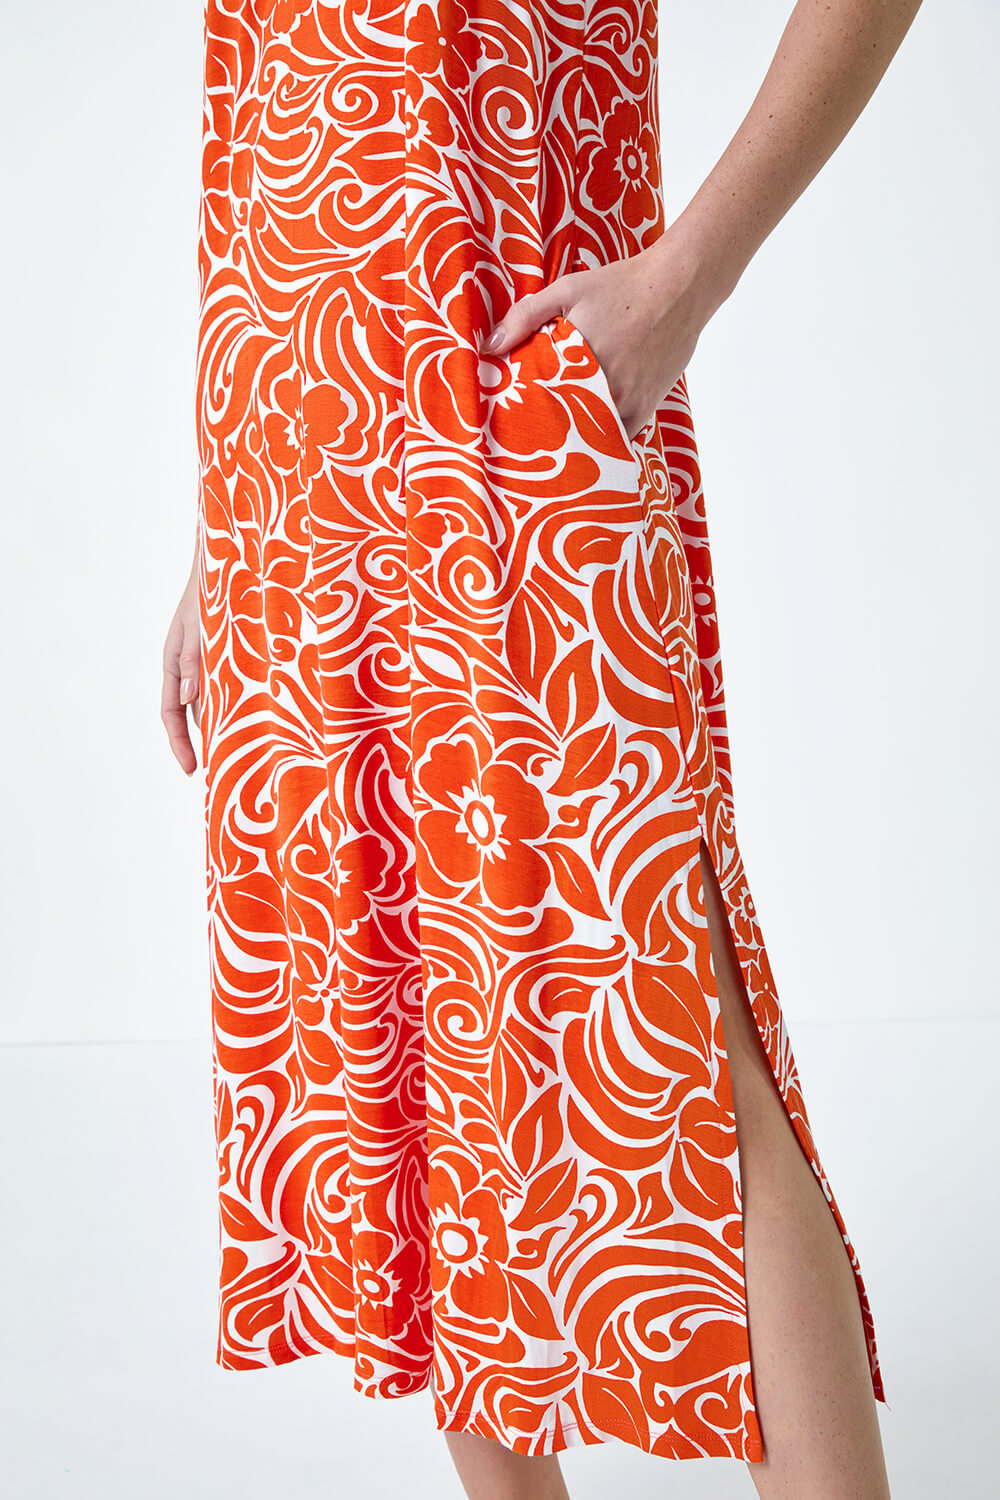 ORANGE Abstract Strappy Swing Stretch Midi Dress, Image 5 of 5